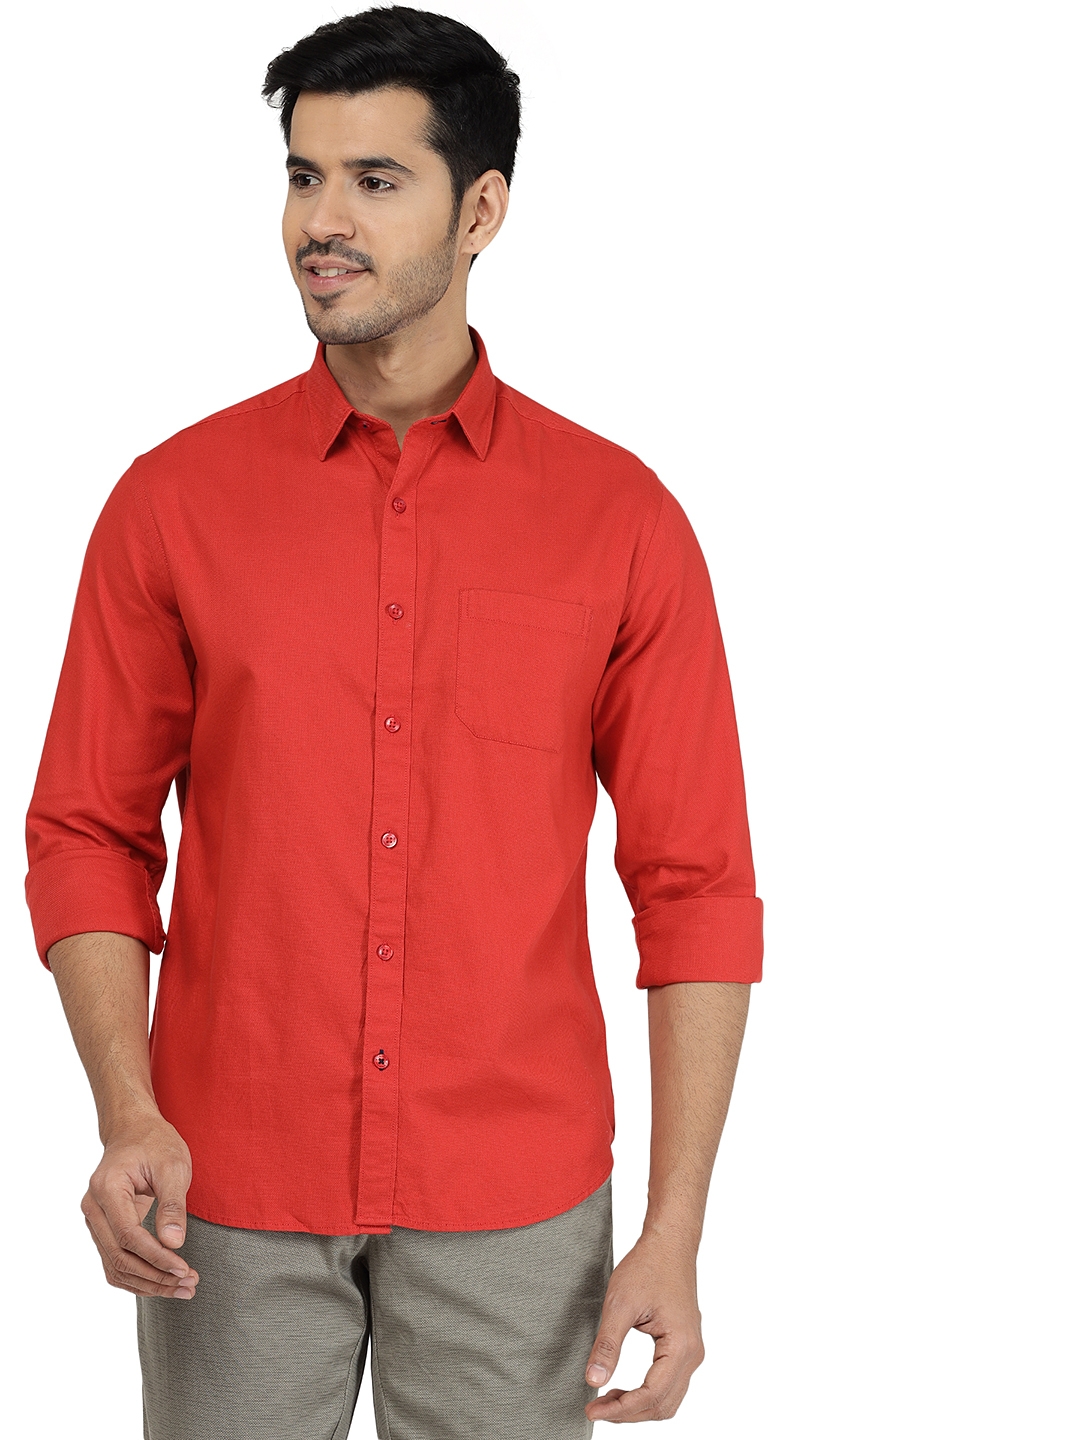 Greenfibre | Paprika Red Solid Classic Fit Casual Shirt | Greenfibre 0